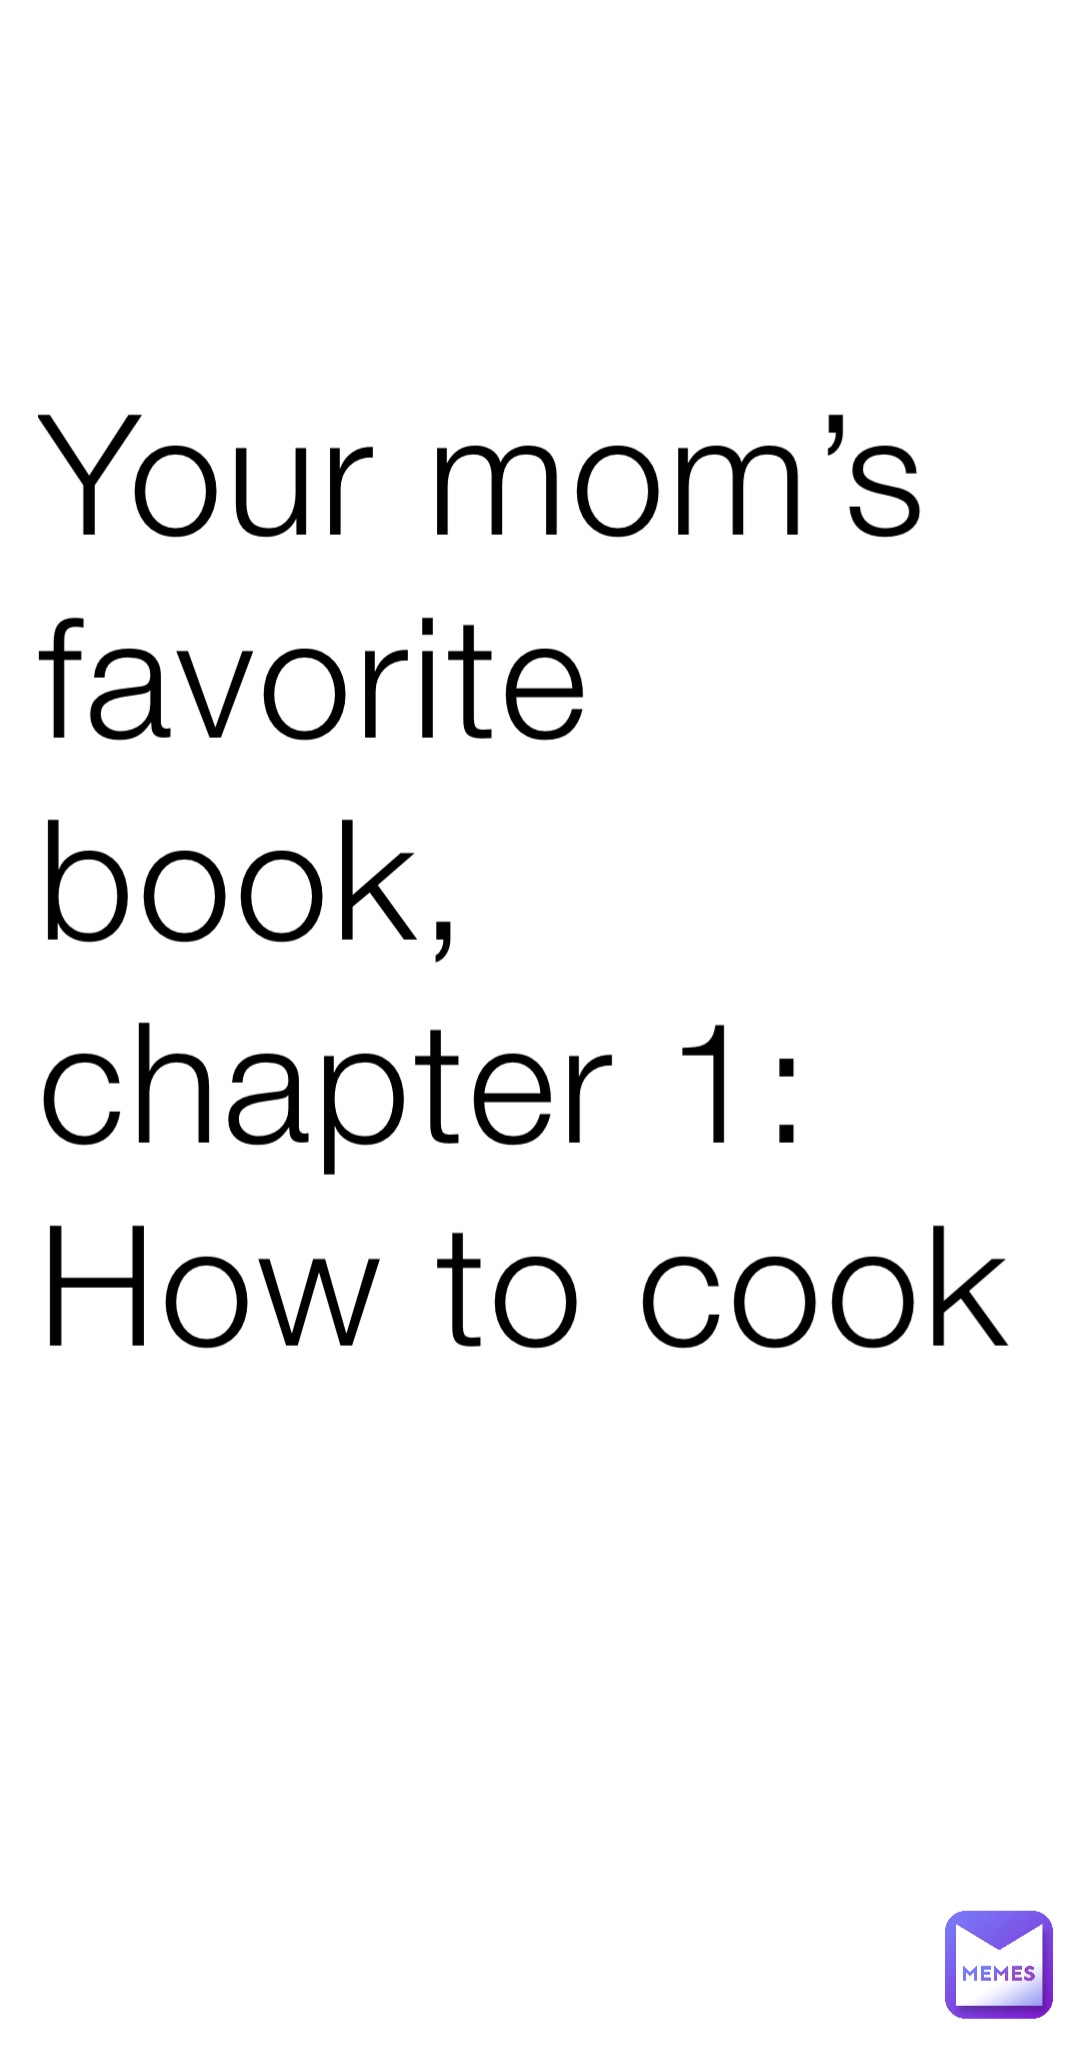 Your mom’s favorite book, chapter 1: How to cook